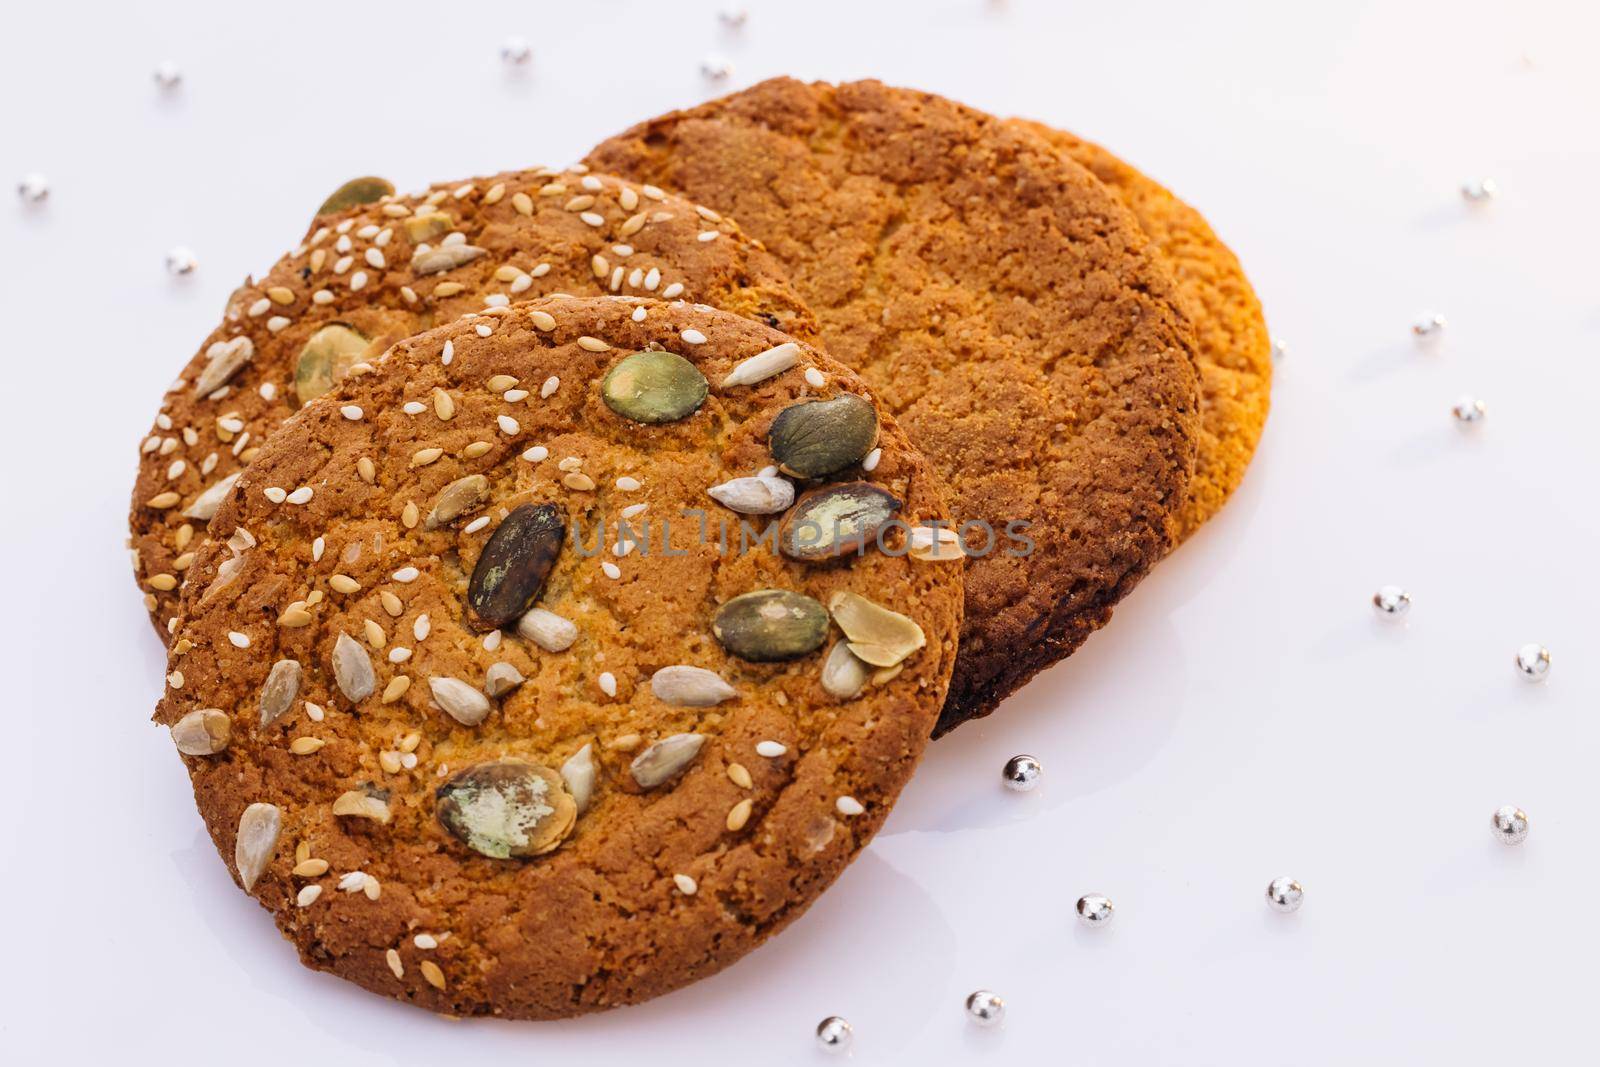 Wheat fall on dietary cookies. Eat oatmeal cookies. Oatmeal cookie on the table with sesame seeds on white background. The concept of making chip cookies by uflypro